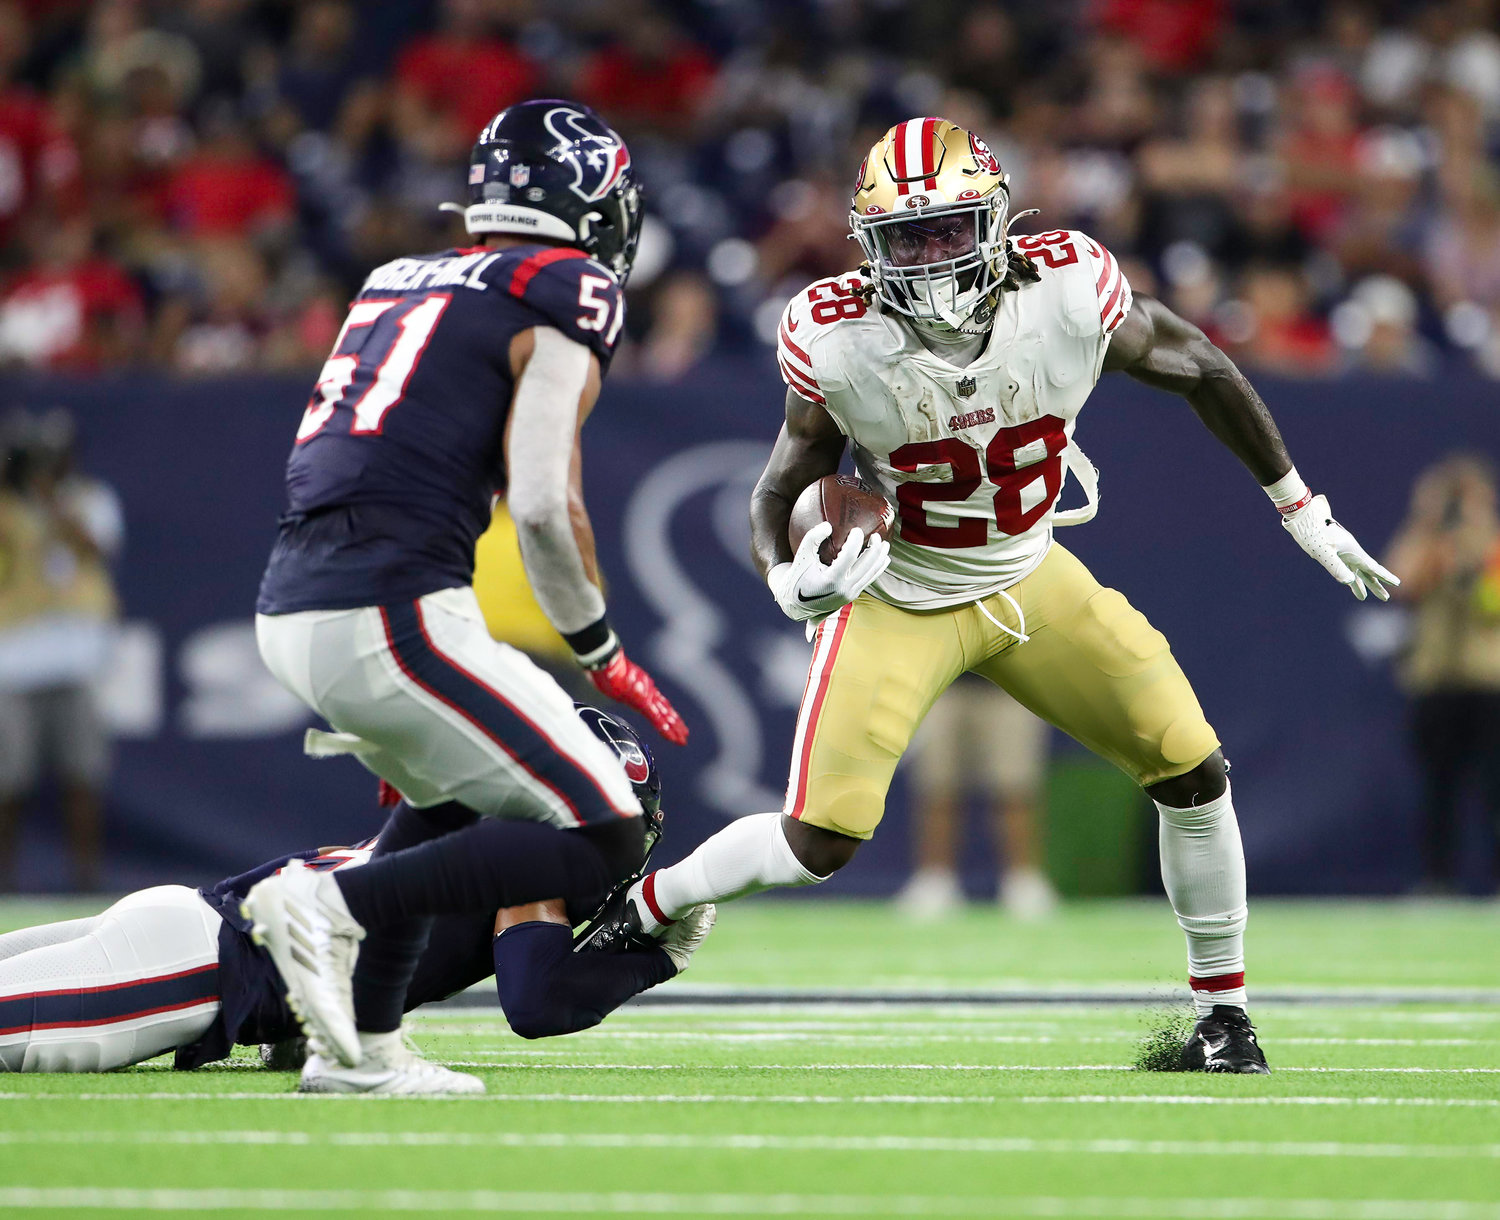 San Francisco 49ers running back Trey Sermon (28) attempts to break a tackle by Houston Texans safety Jalen Pitre (5) during an NFL preseason game between the Texans and the 49ers in Houston, Texas, on August 25, 2022.